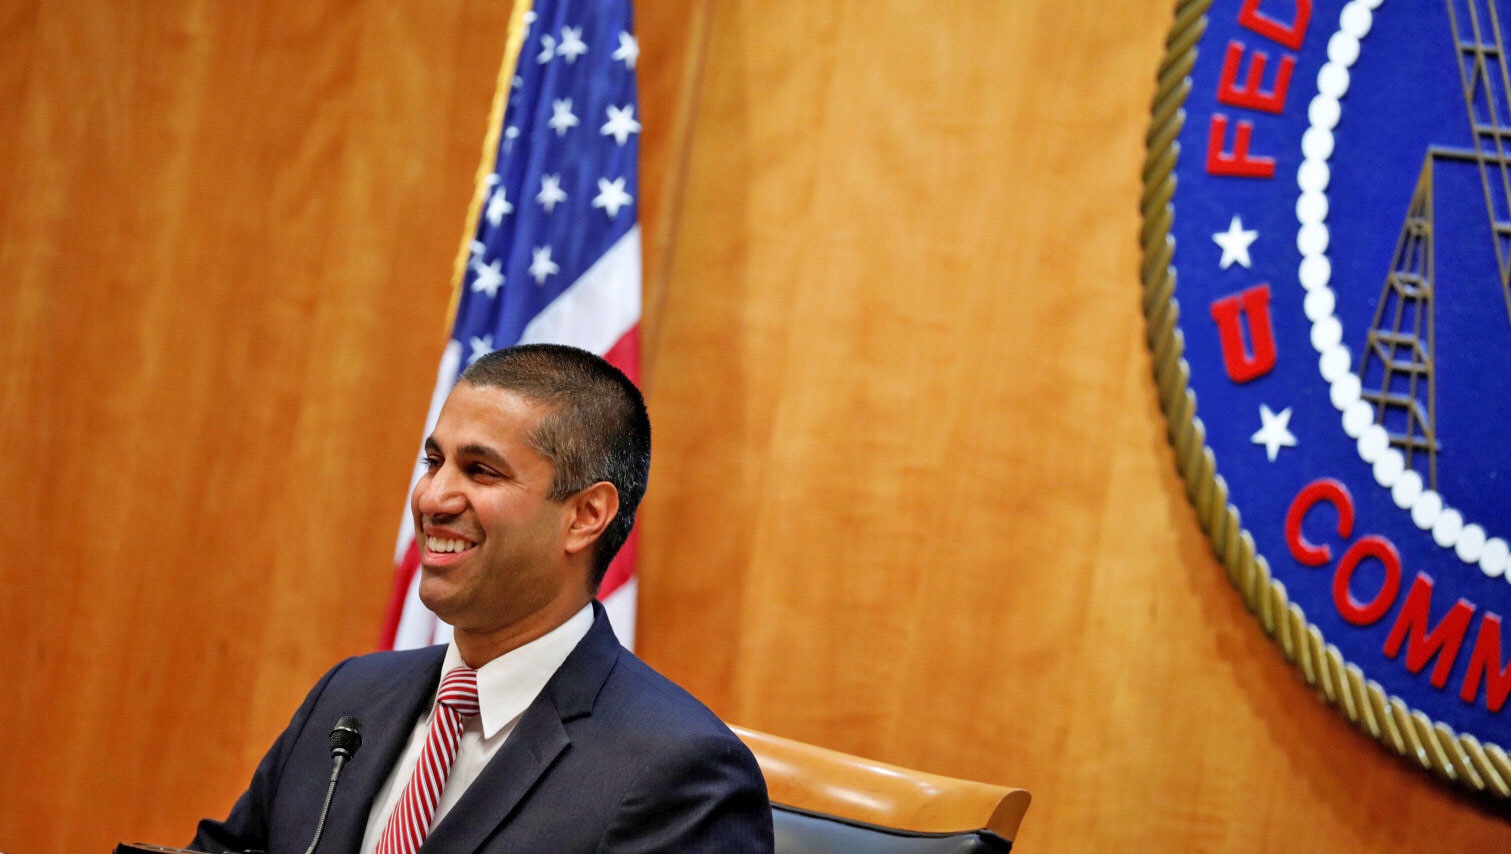 New evidence sheds more light on fake net neutrality comments debate